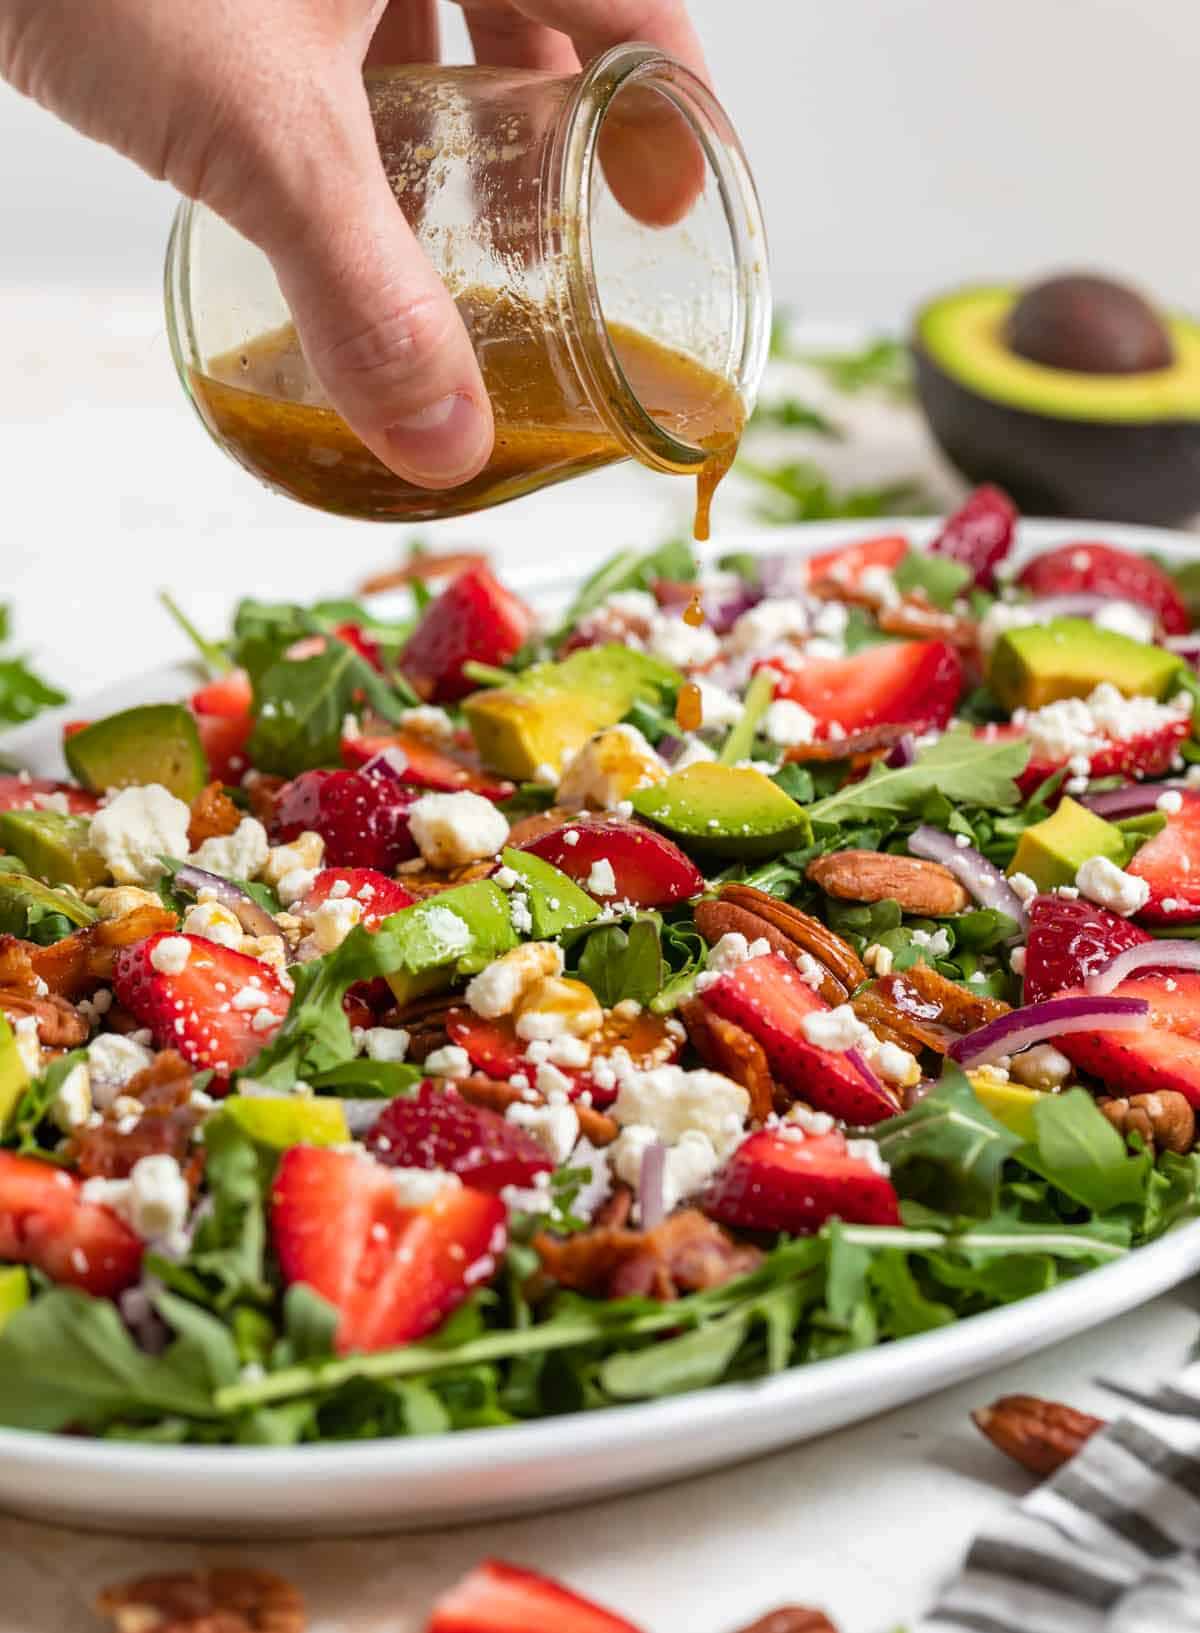 Pouring dressing on a strawberry goat cheese bacon salad.